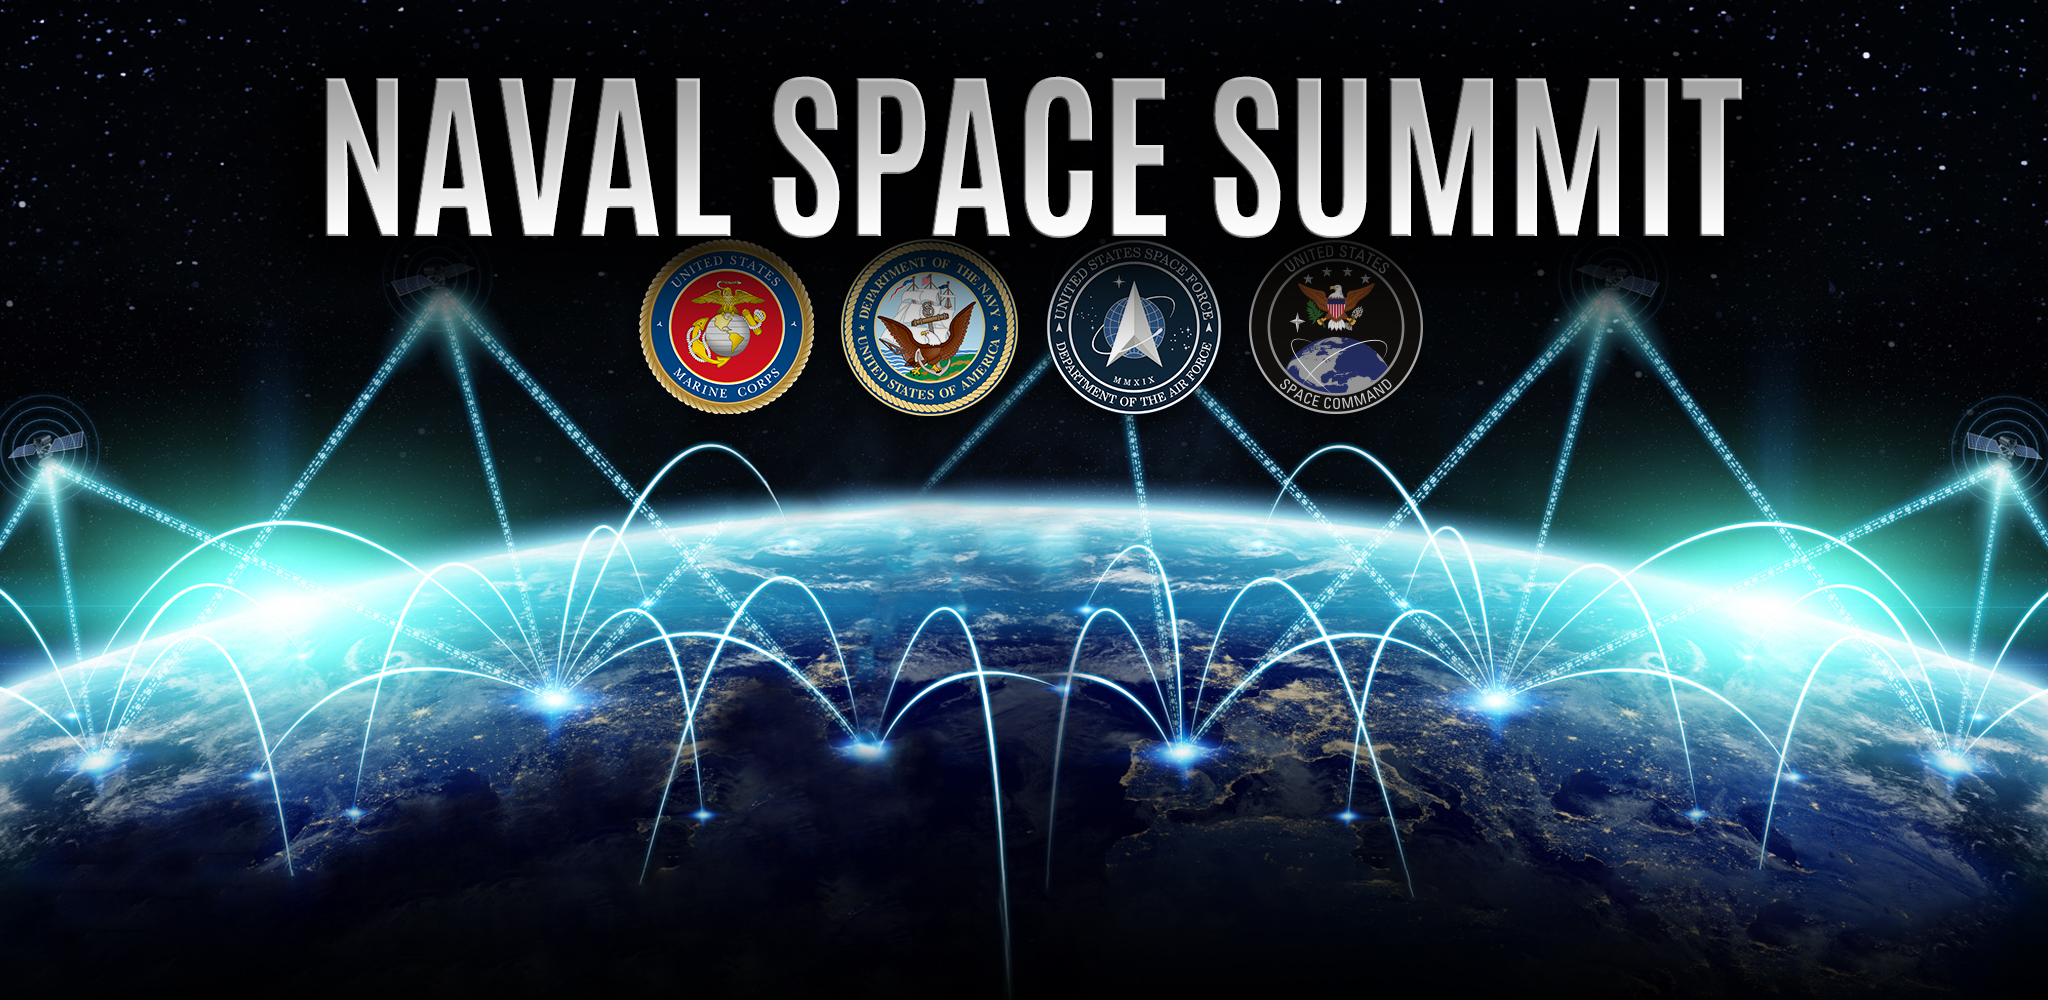 Naval Space Summit graphic with globe and seals for armed services with text Naval Space Summit